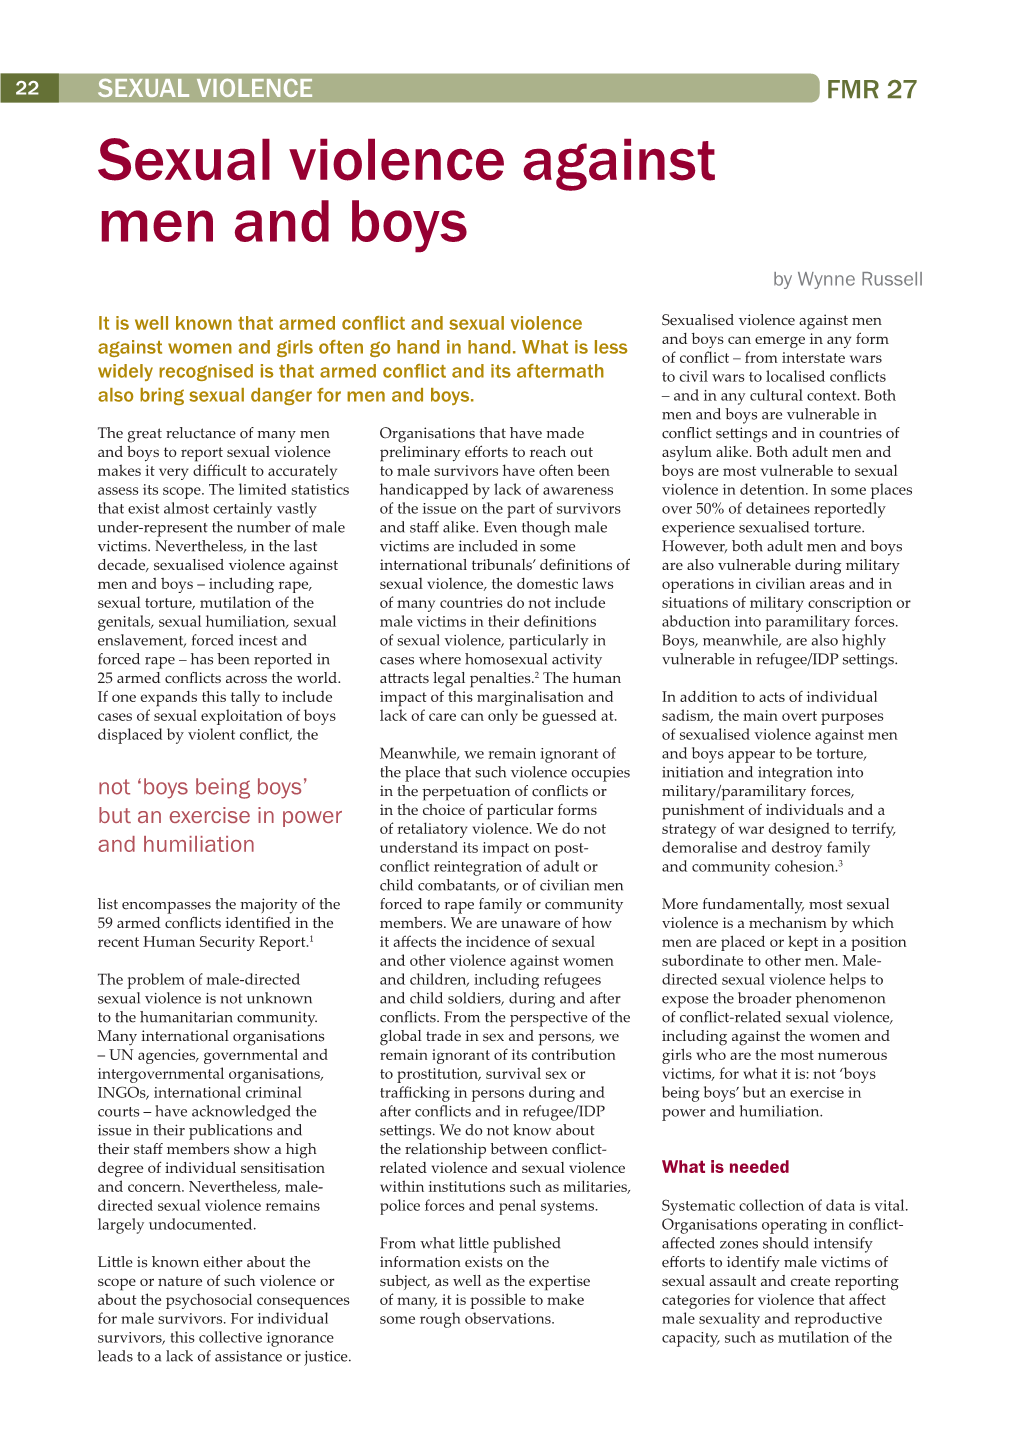 Sexual Violence Against Men and Boys by Wynne Russell